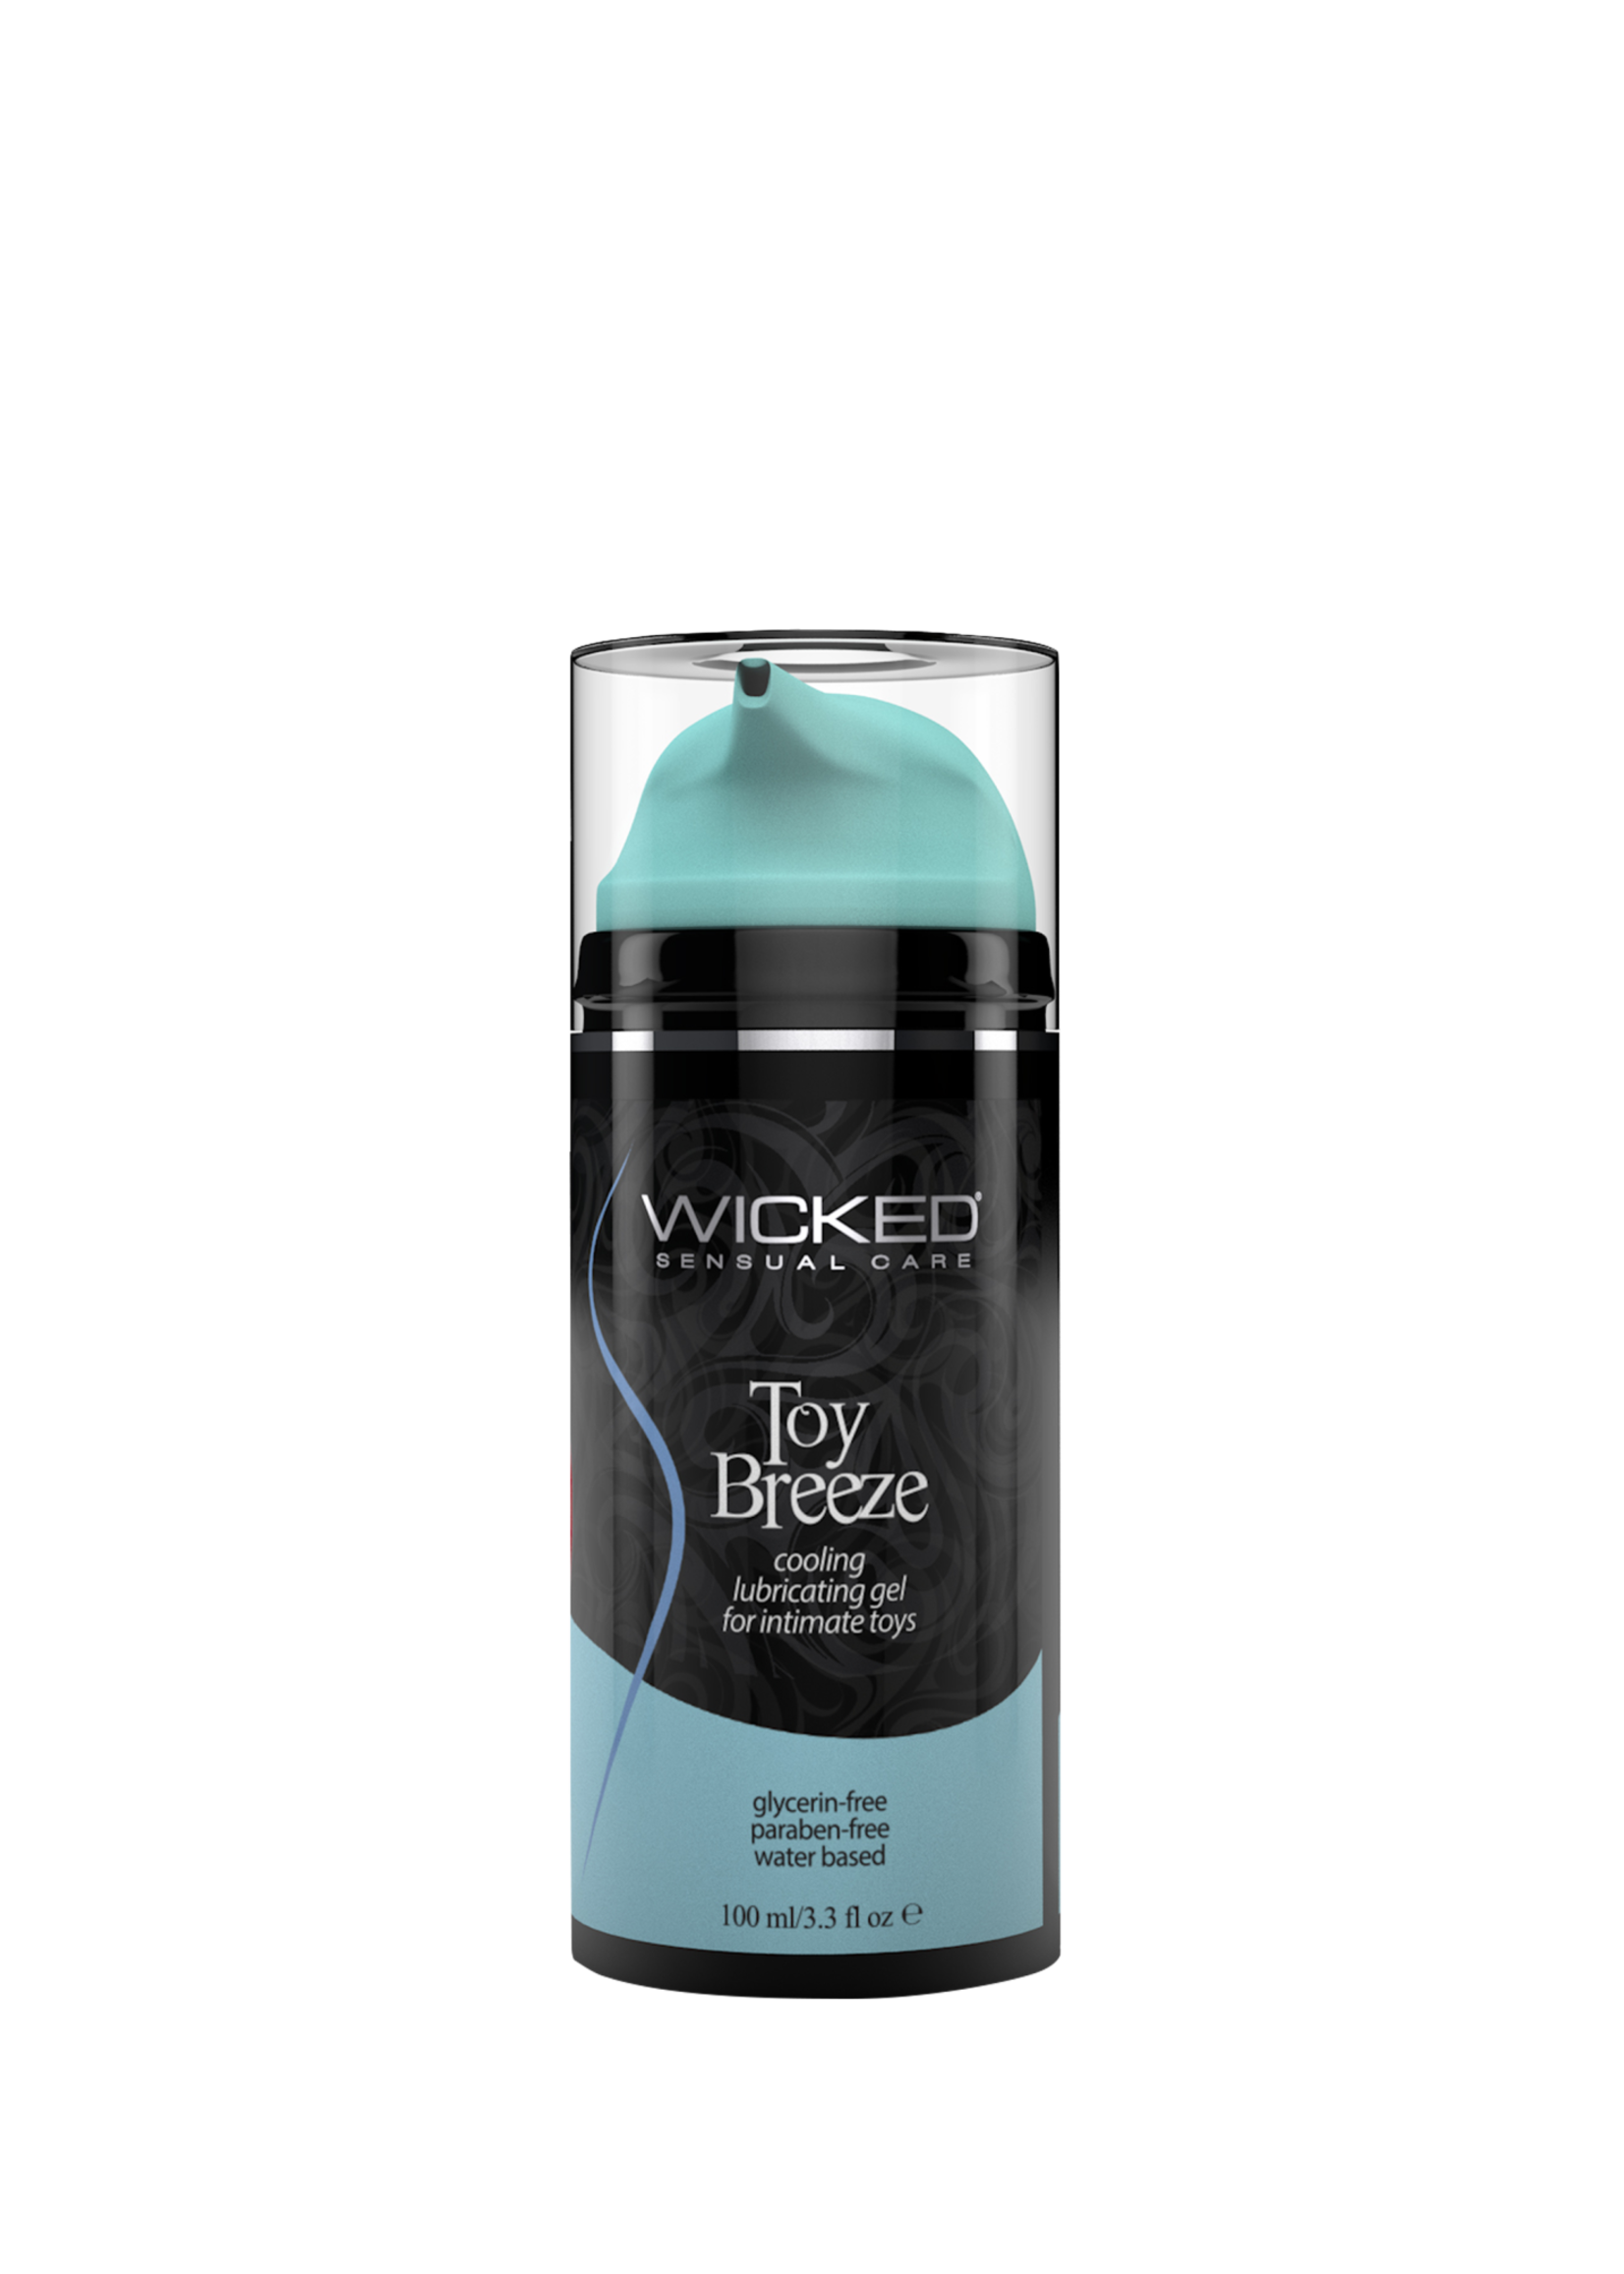 Wicked Sensual Care Toy breeze cooling lube - 100 ml